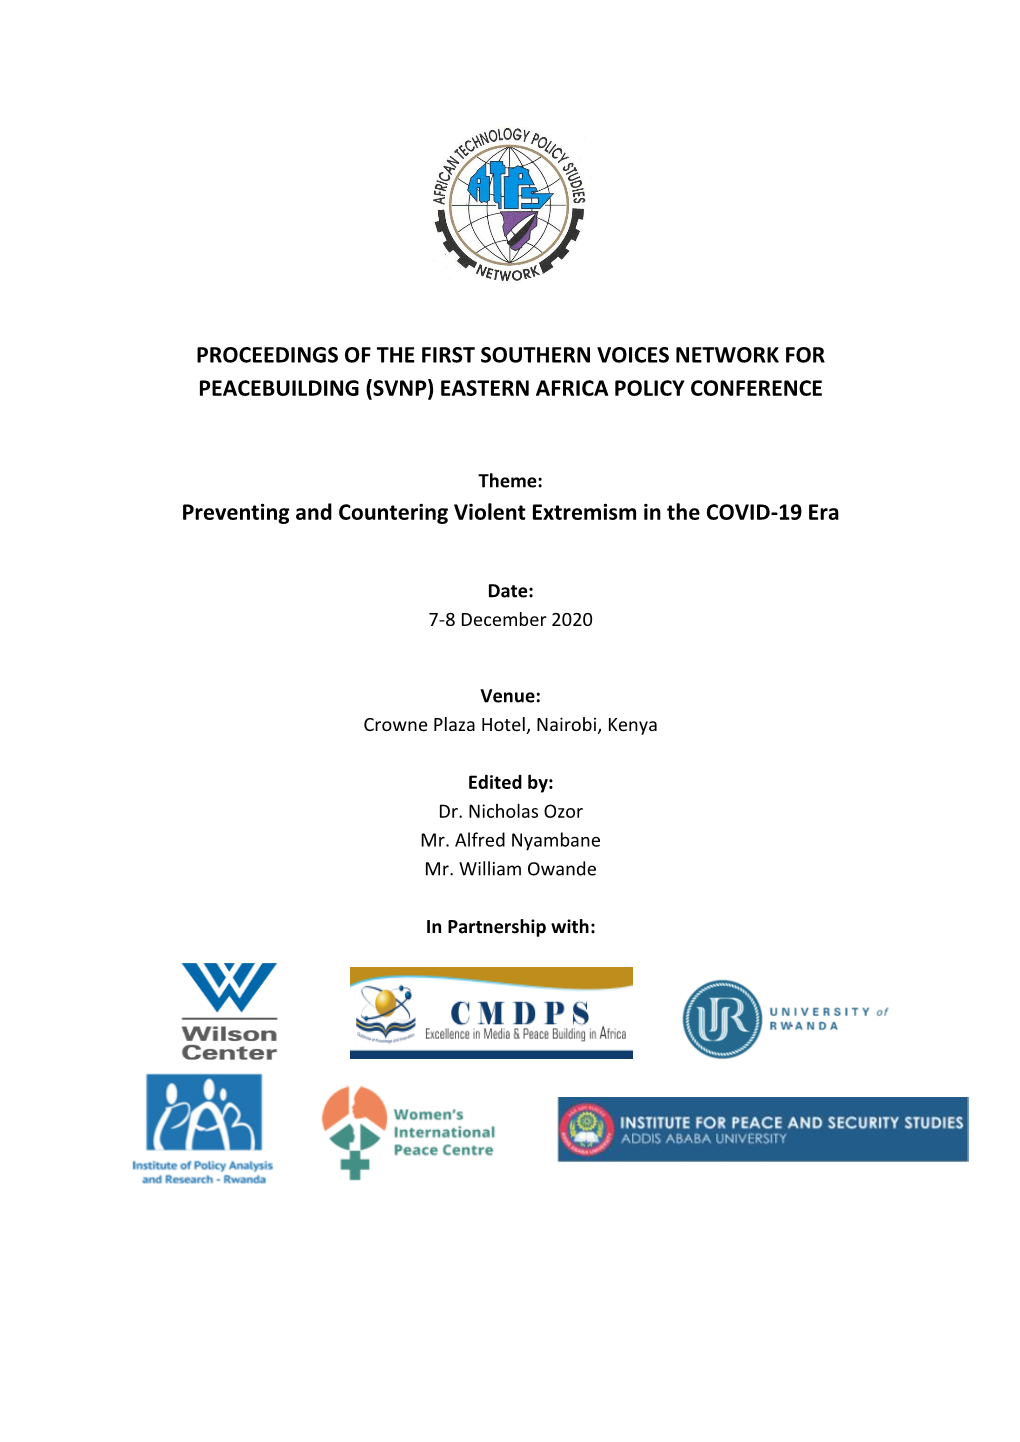 Report of the SVNP Eastern Africa Policy Conference On